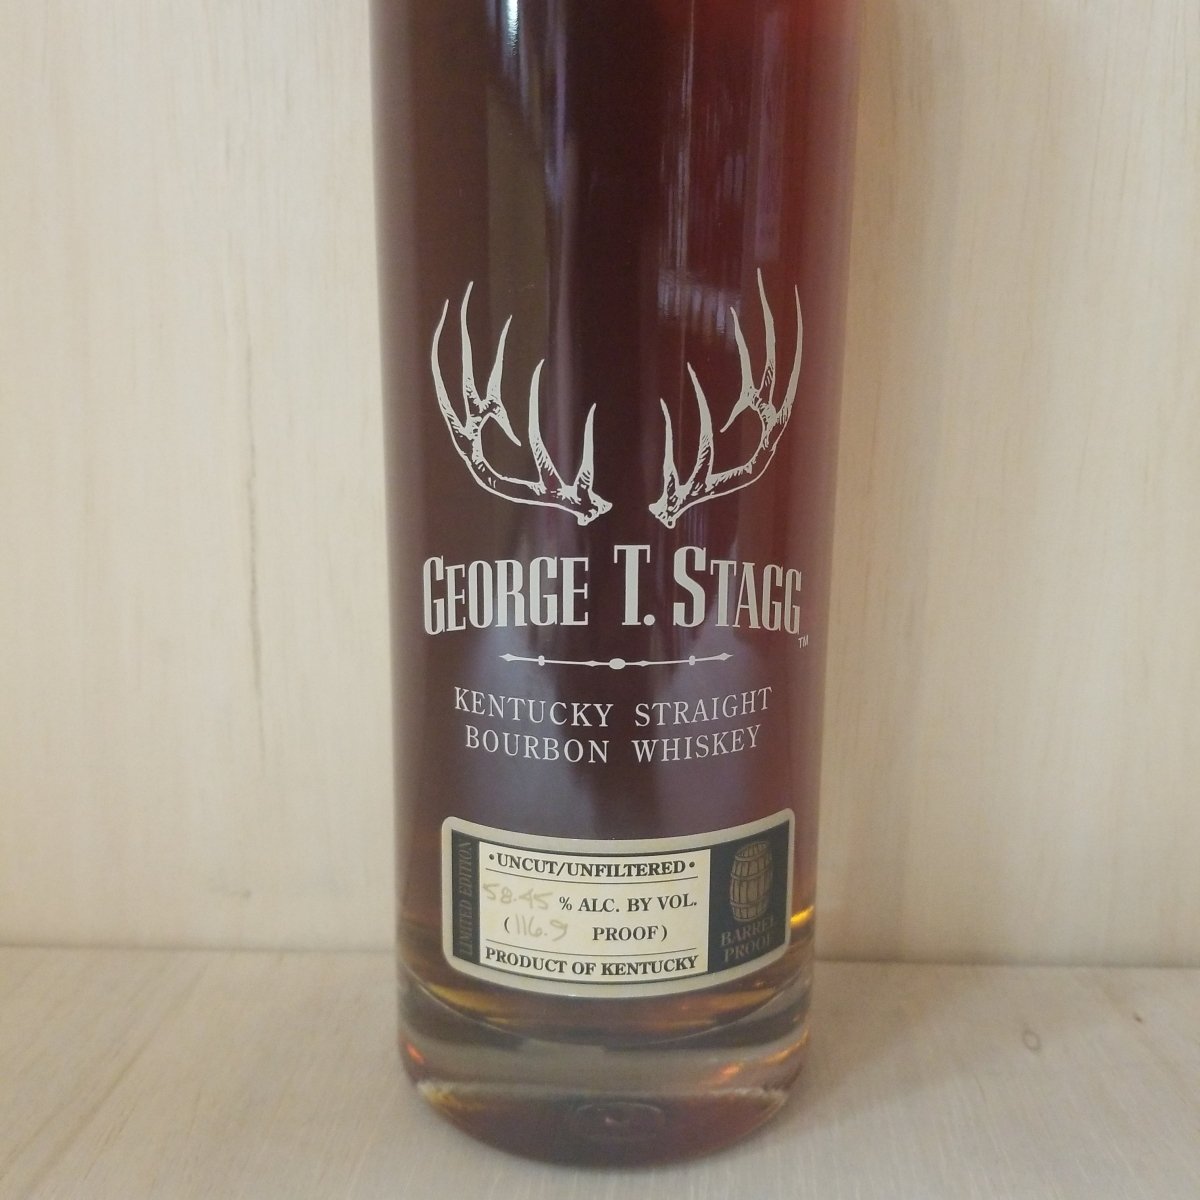 George T Stagg Bourbon 2019, 750ml (116.9 Proof) - Sip & Say